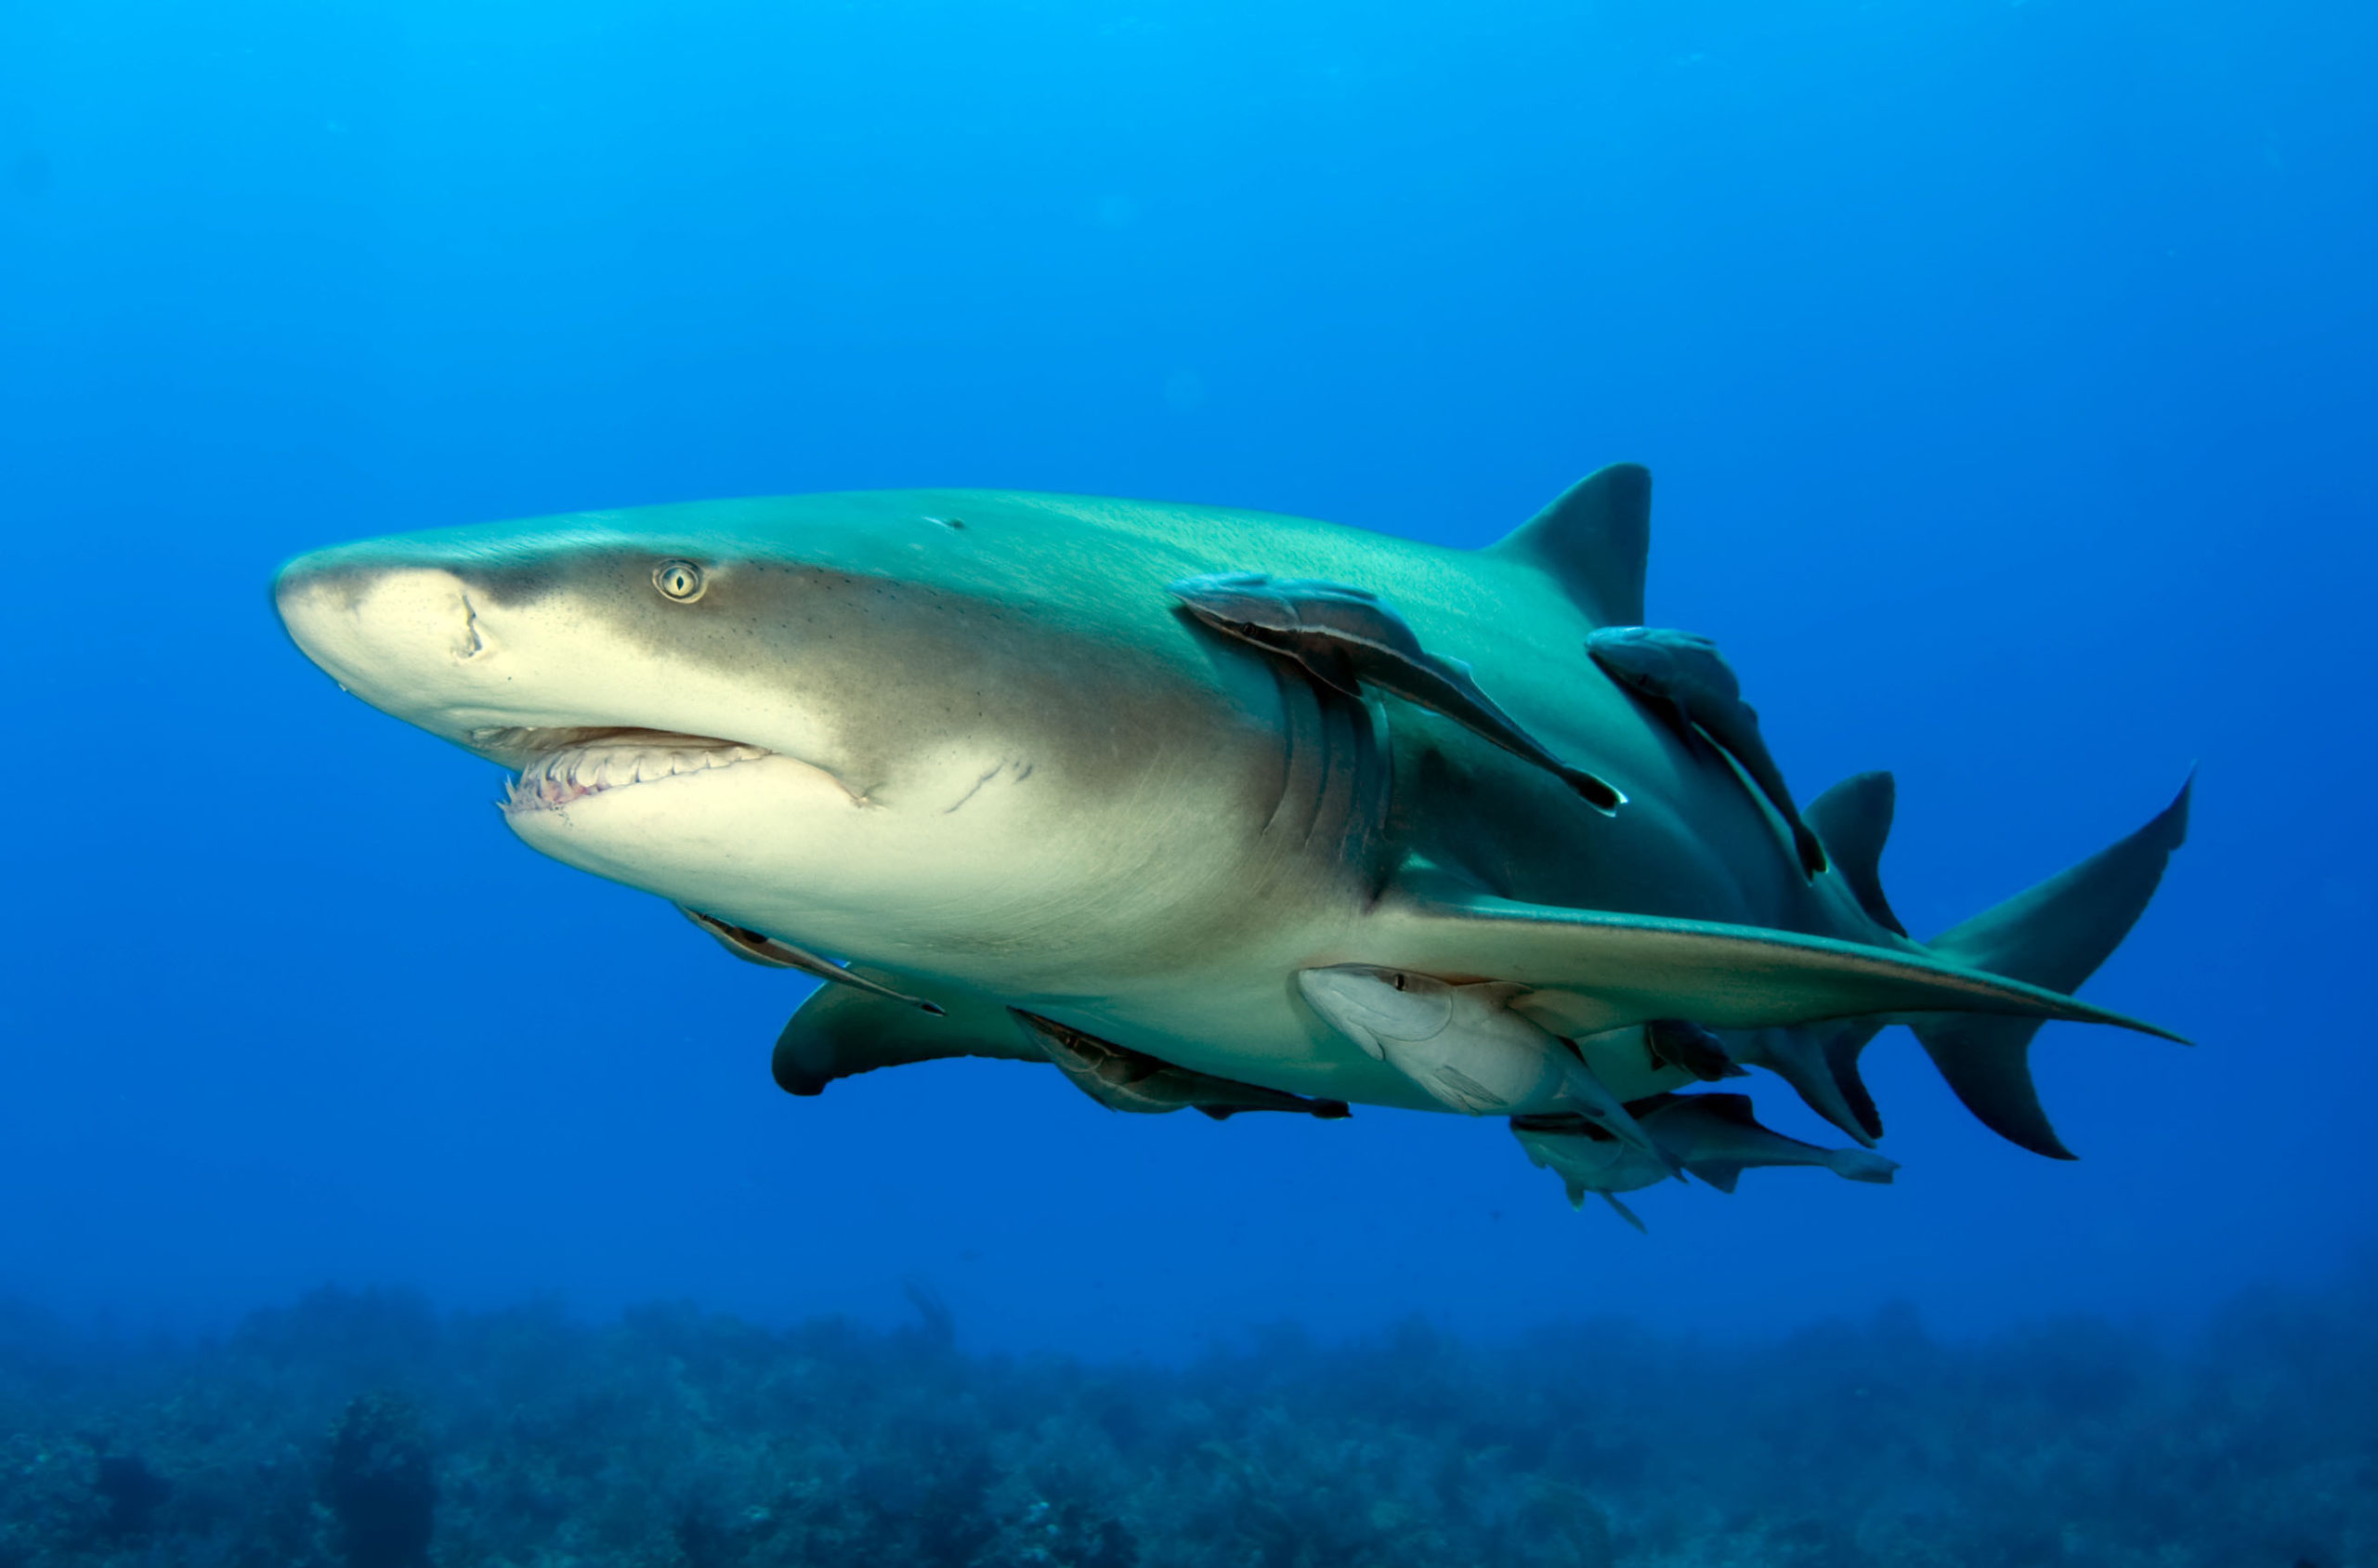 Shark and remora fish in symbiotic relationship.